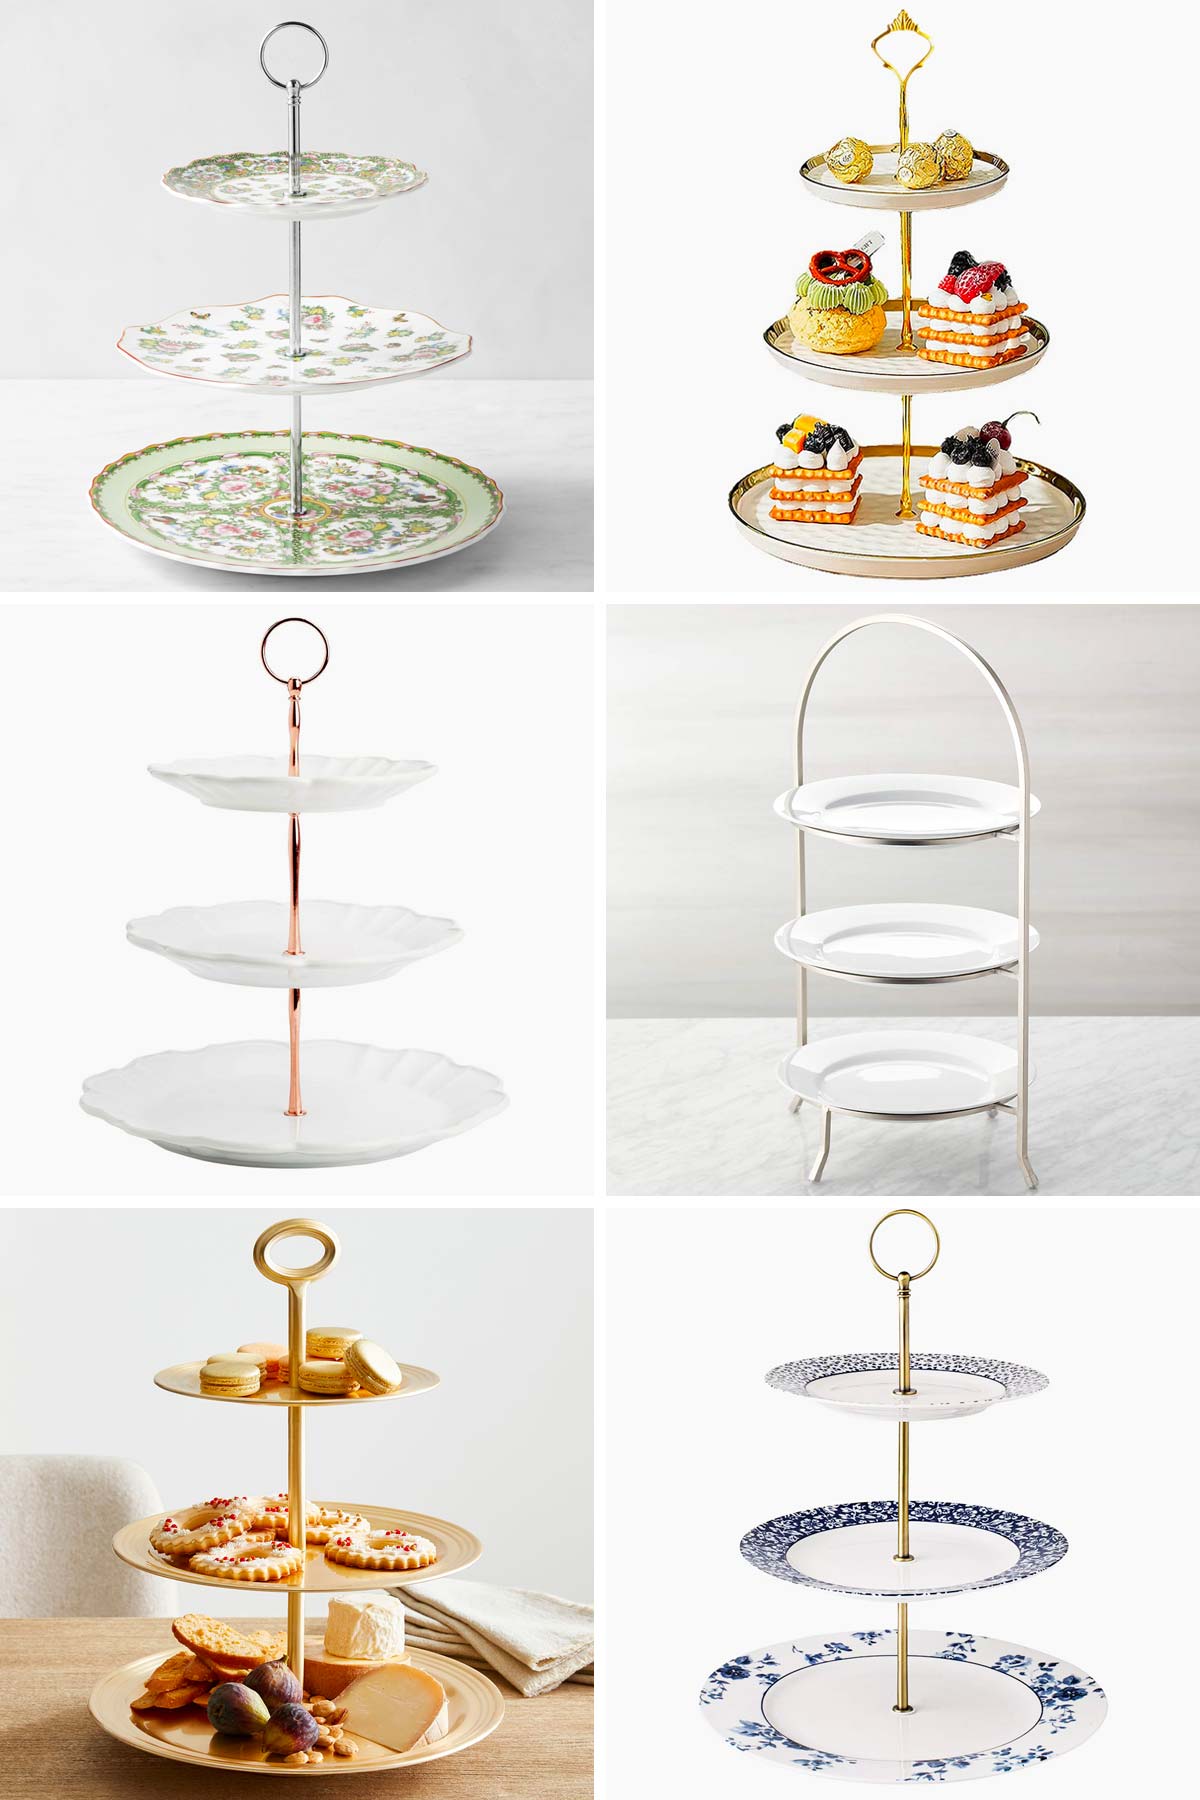 Six 3 tier trays from a range of designs.